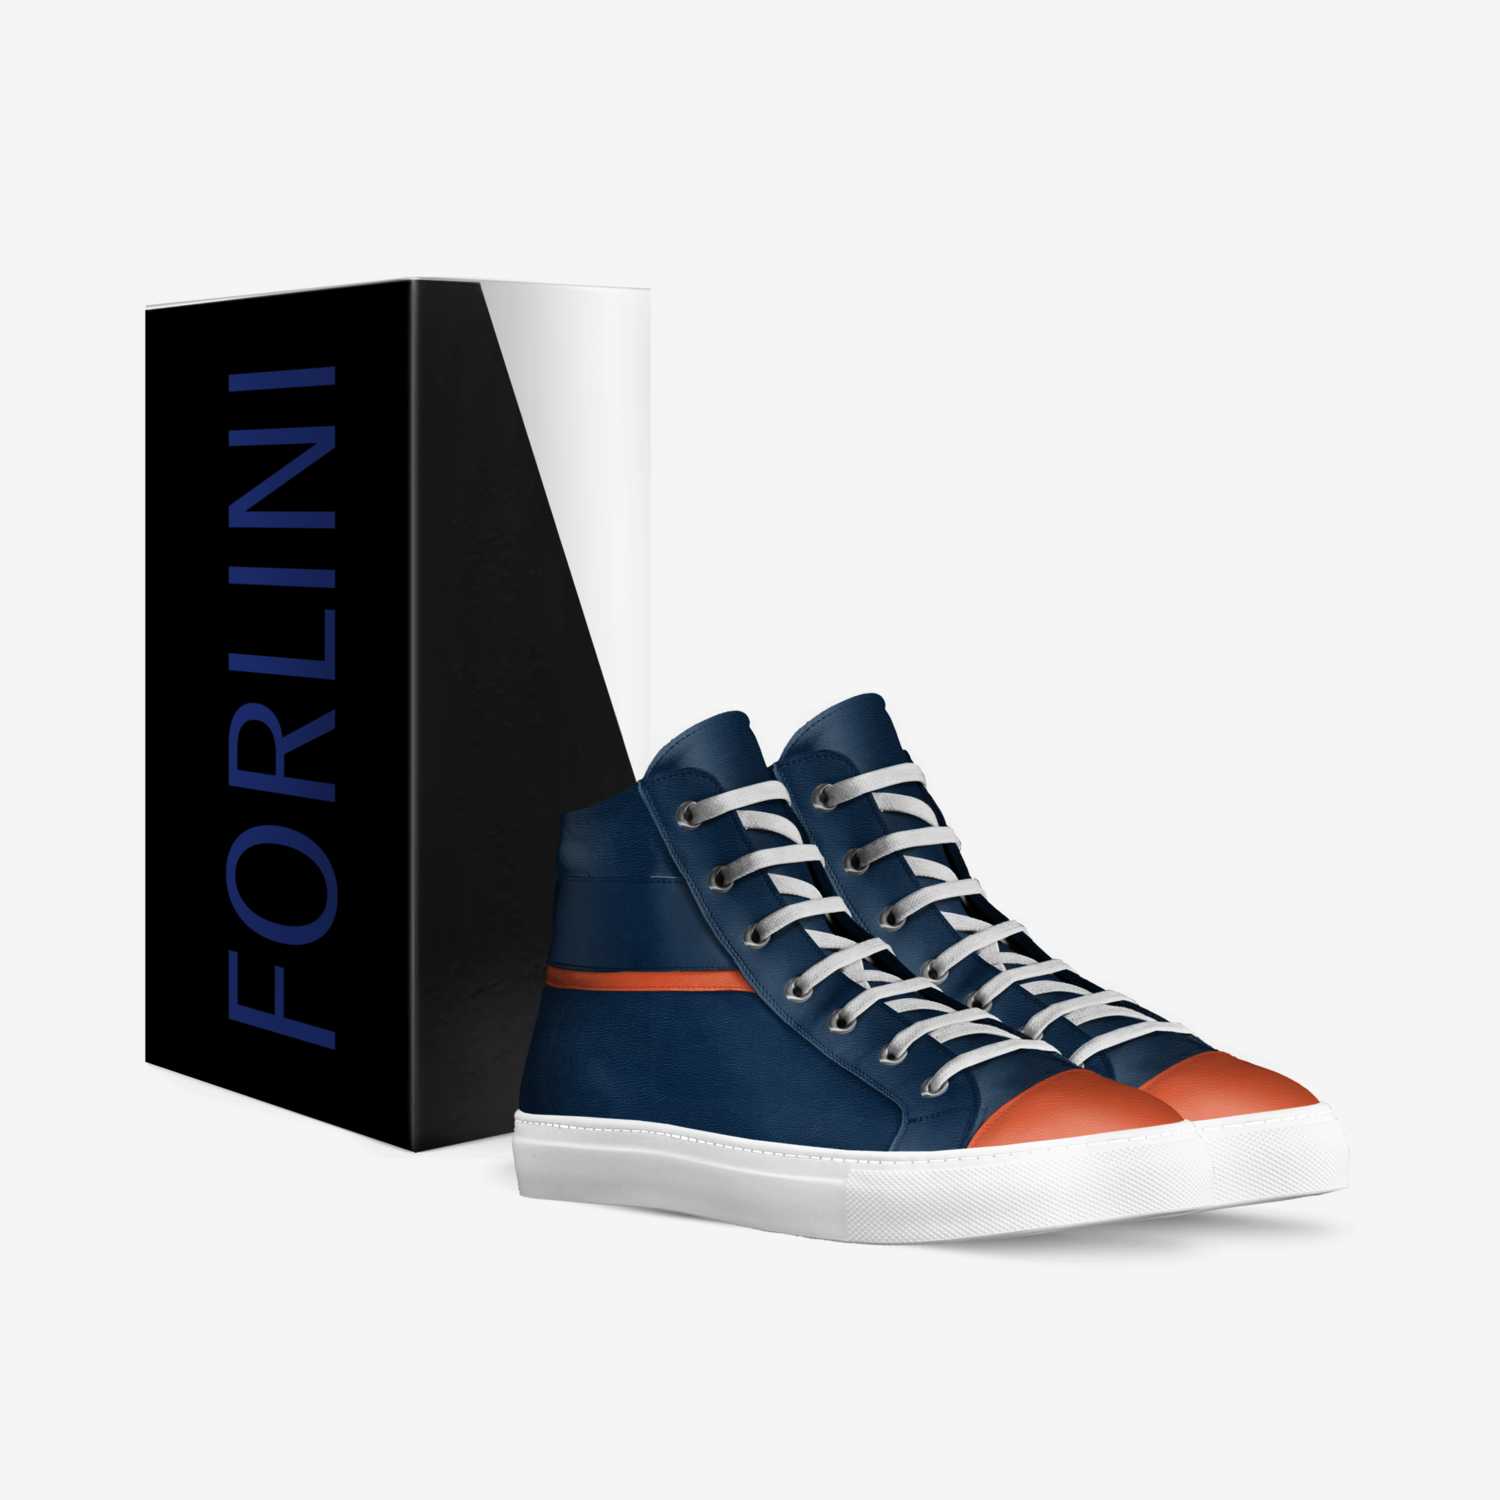 Forlini custom made in Italy shoes by Anthony Forlin | Box view